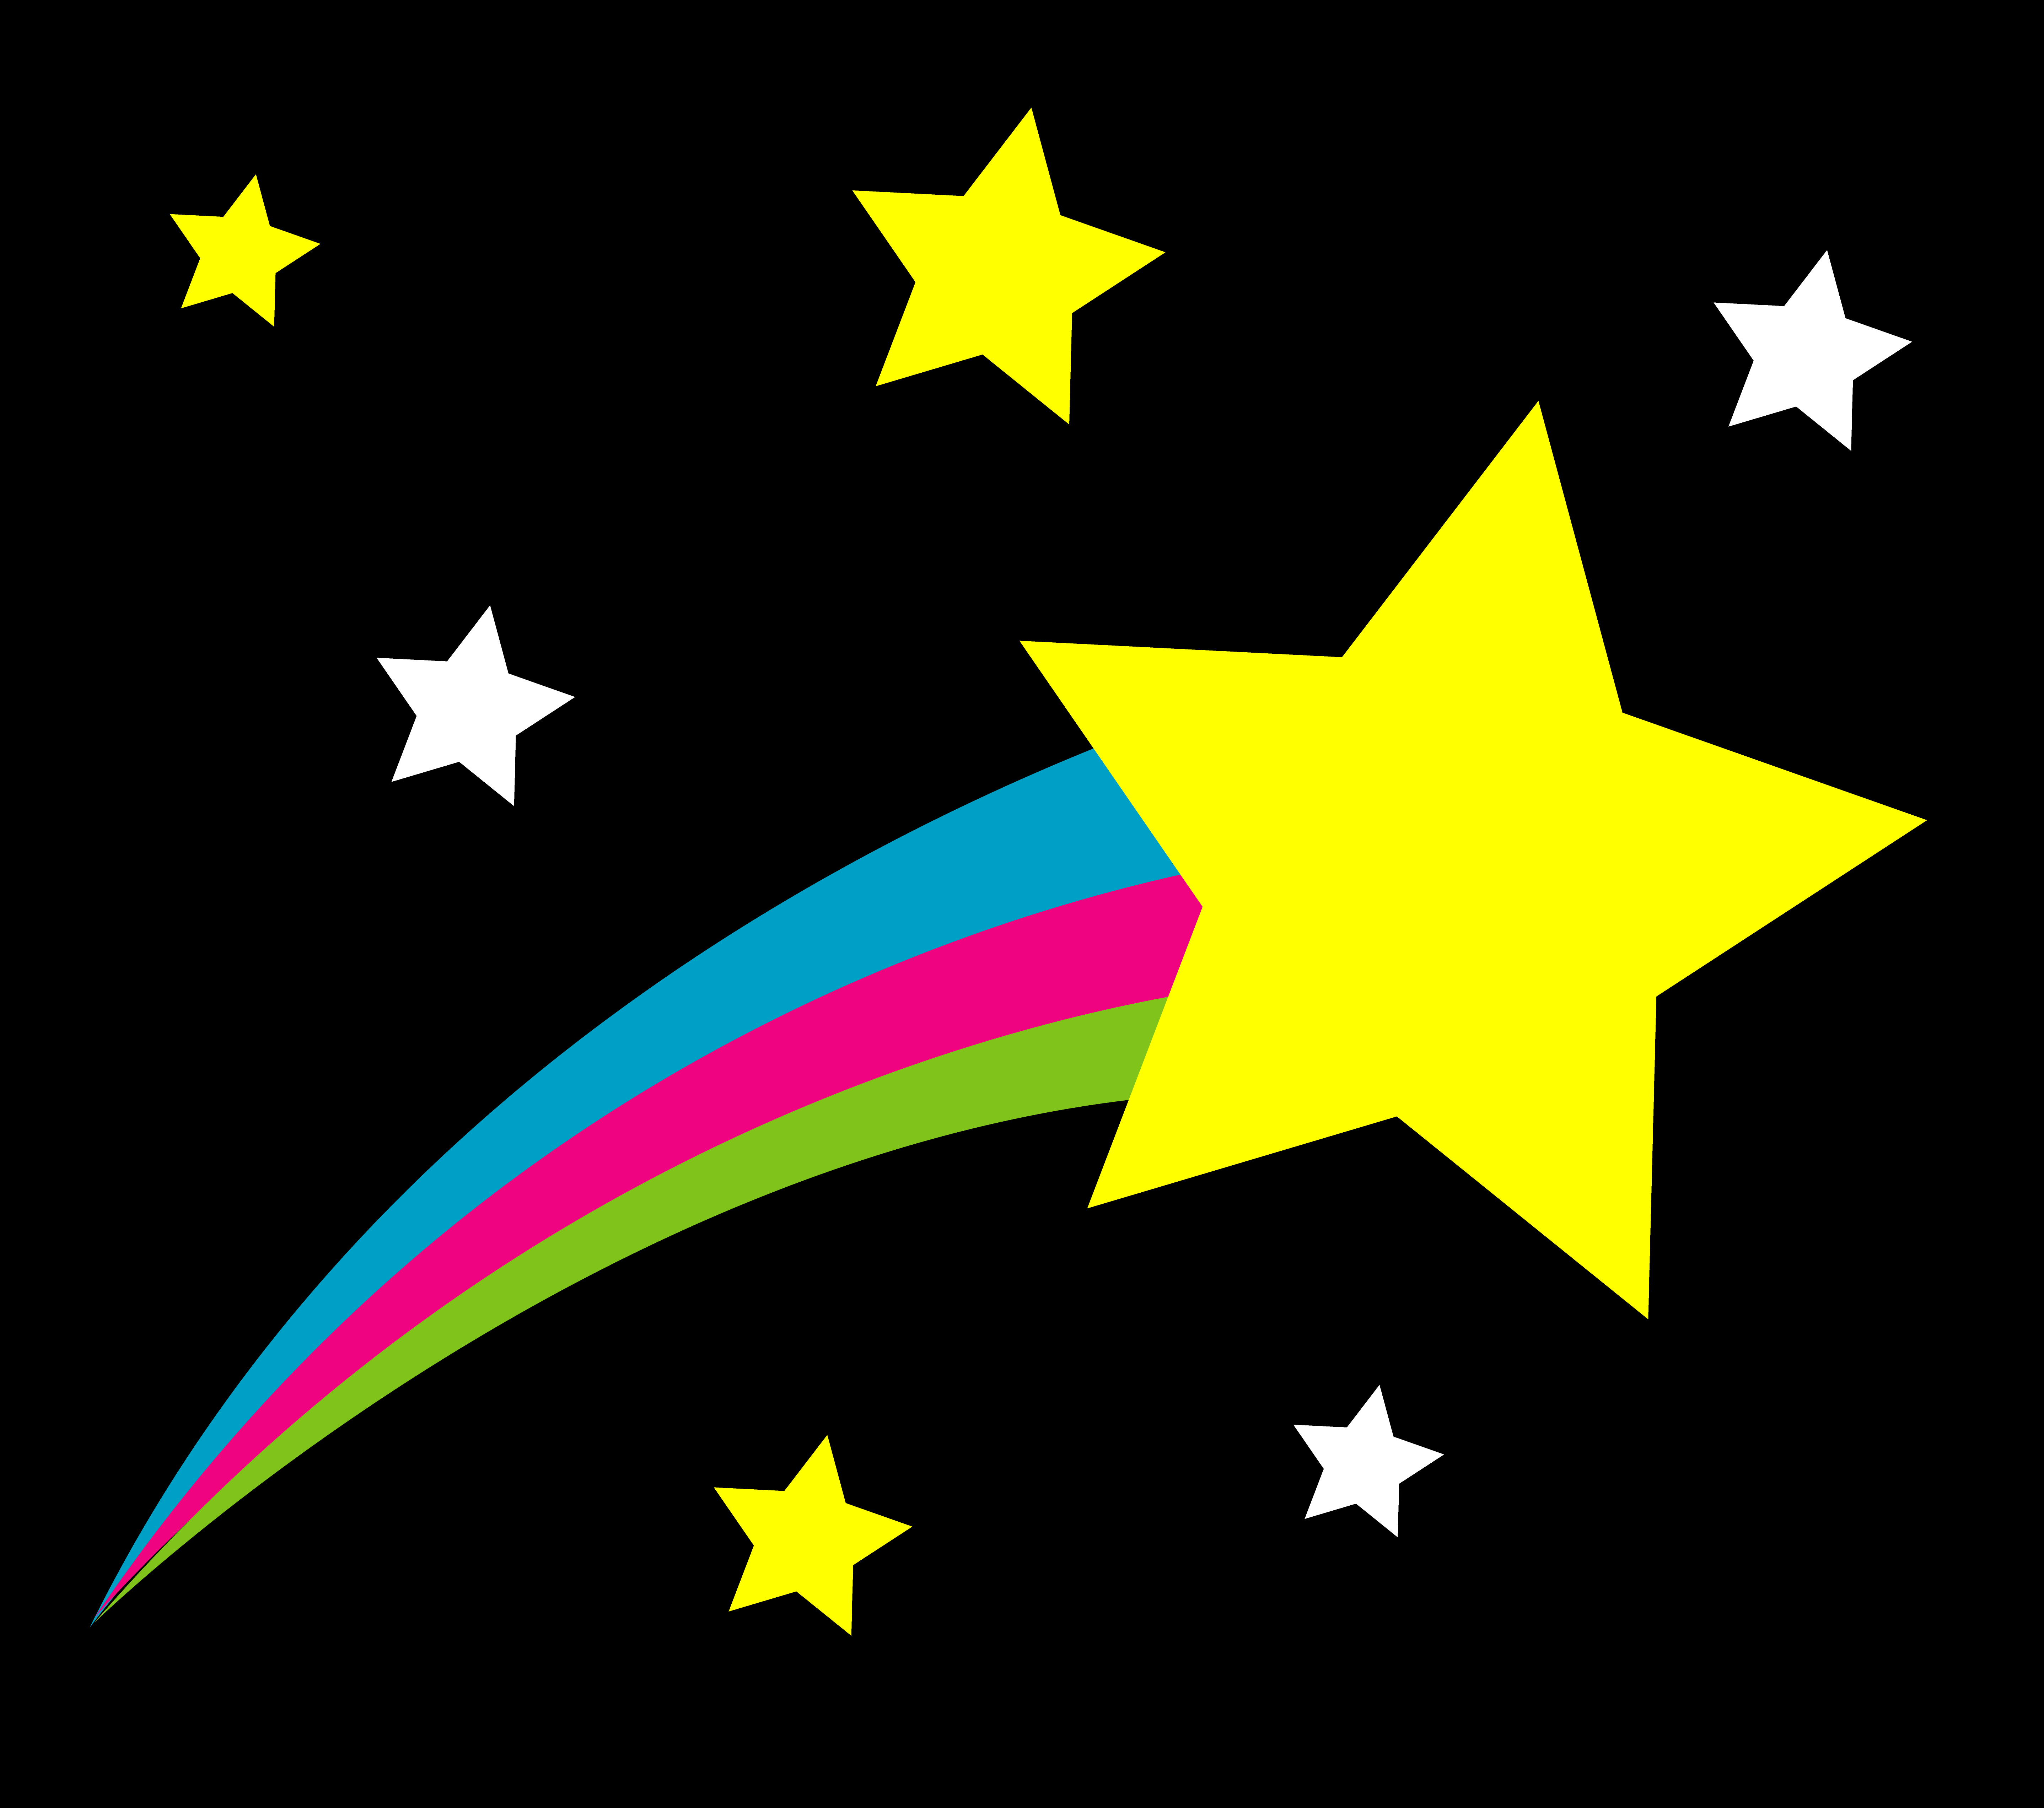 Shooting Star on Black Background - Free Clip Art